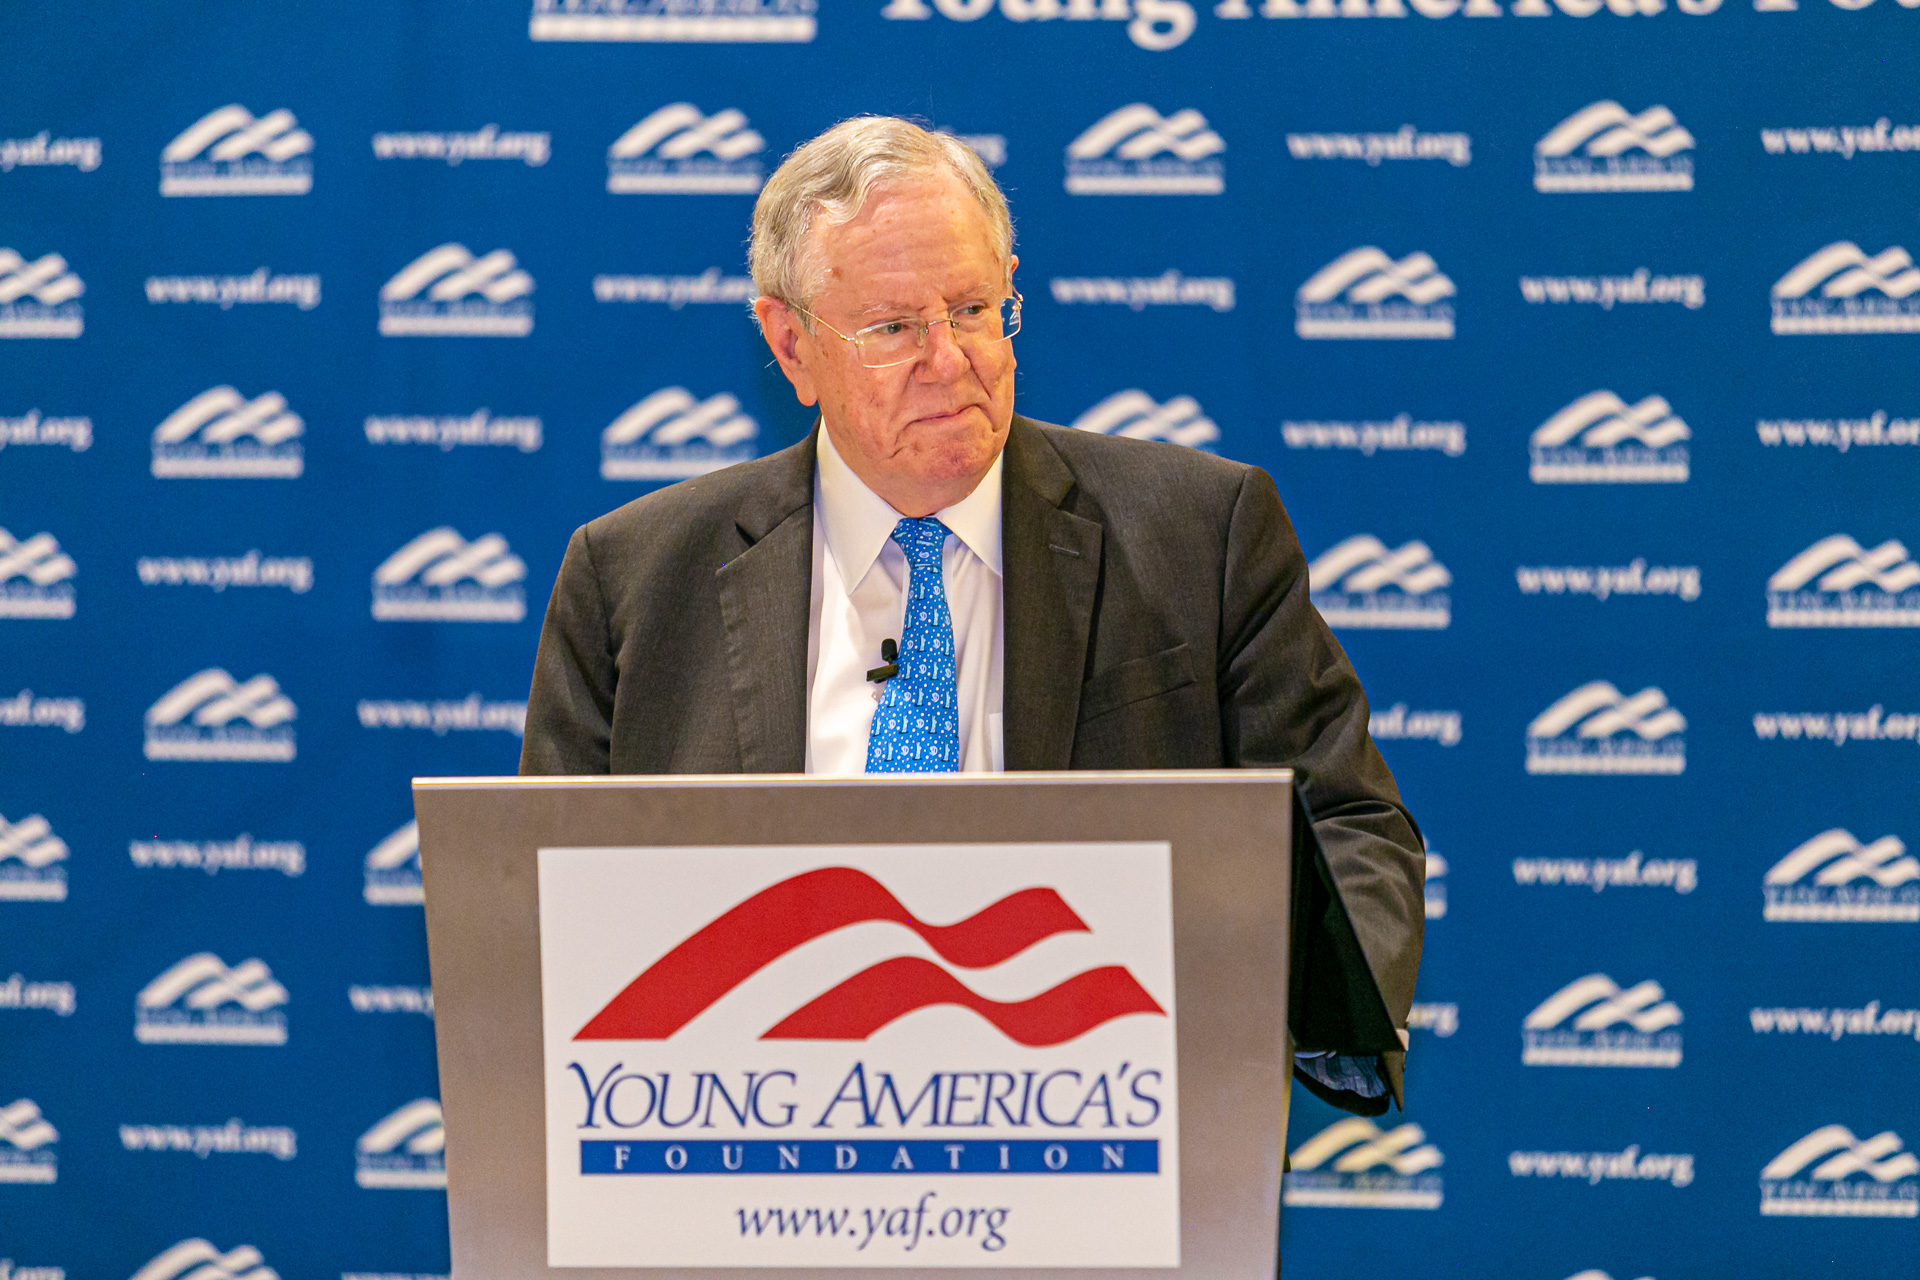 <h1><strong>The Wonders of Free Enterprise featuring Steve Forbes at the 2021 Free Enterprise Leaders Conference</strong></h1>